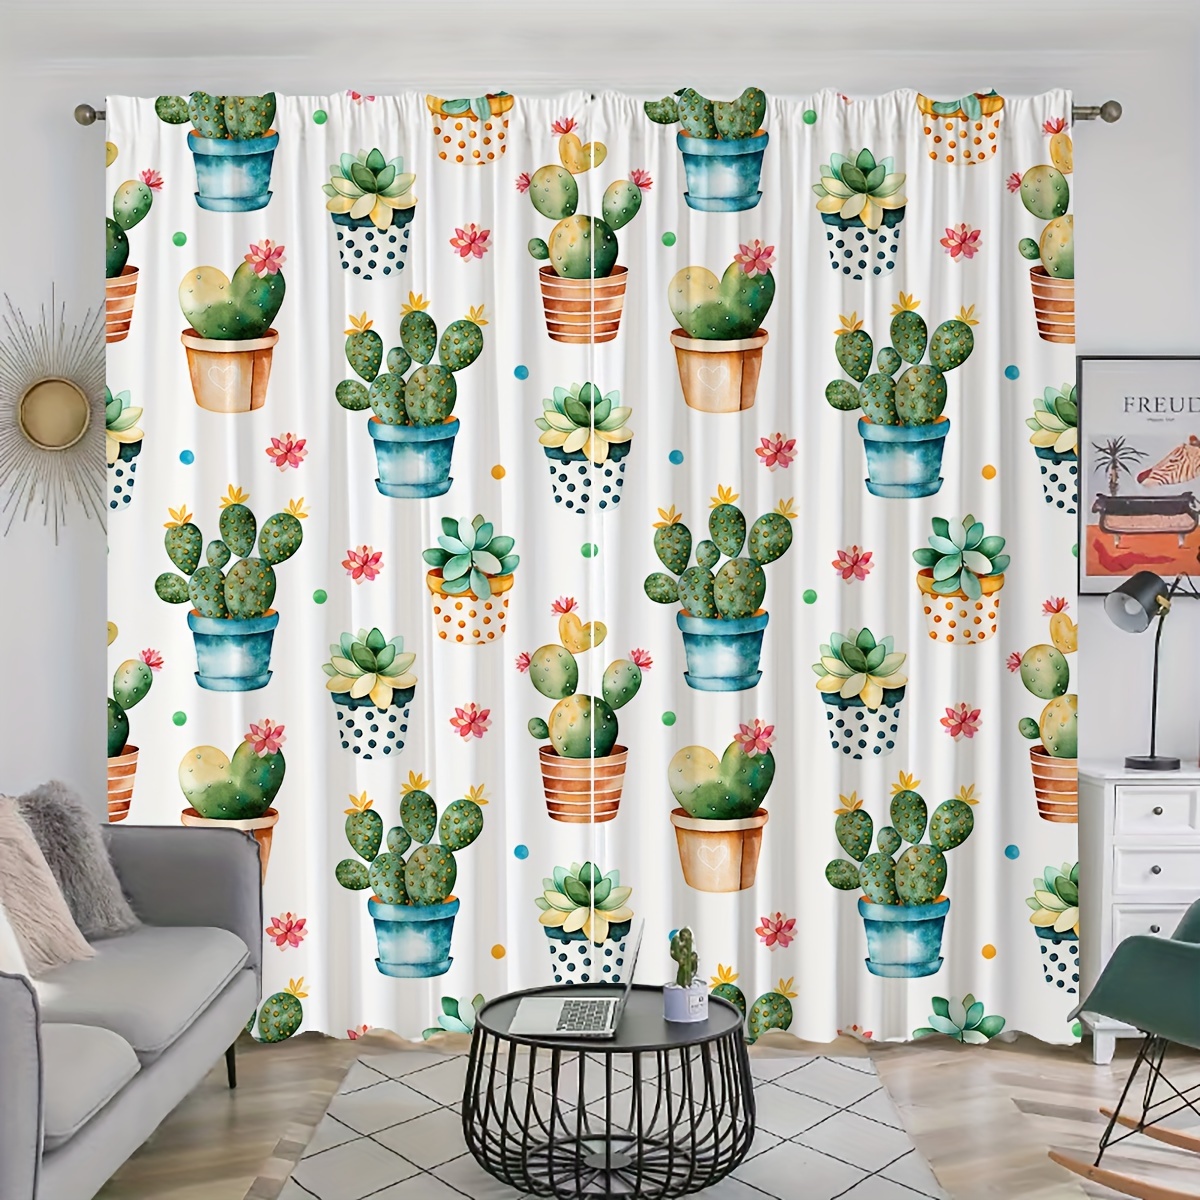 

2pcs, Potted Printed Curtains With Cactus And Succulent Plants, Rod Pocket Curtain, Suitable For Restaurants, Public Places, Living Rooms, Bedrooms, Offices, Study Rooms, Home Decoration